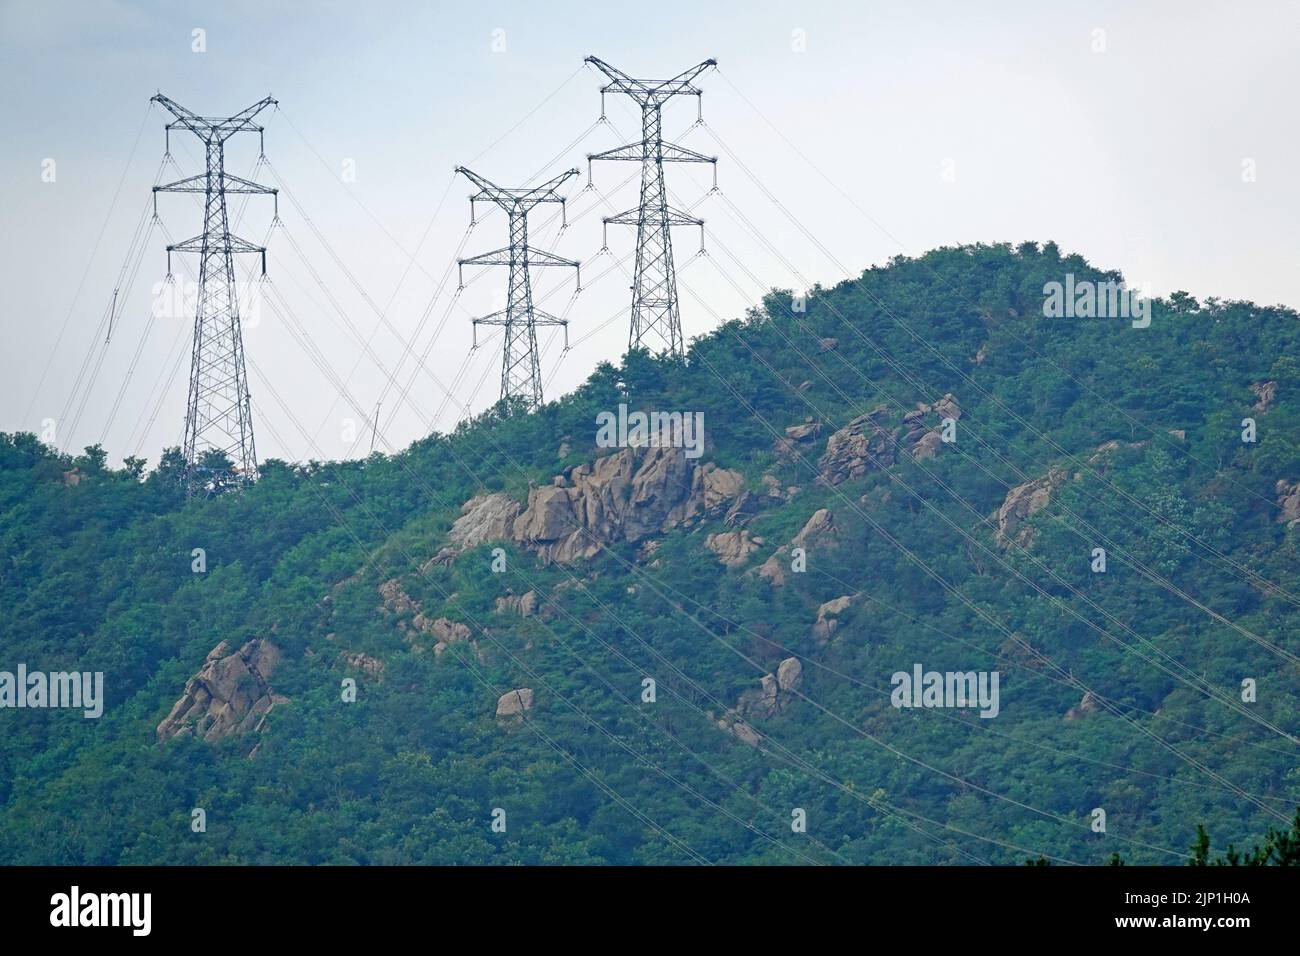 YANTAI, CHINA - AUGUST 14, 2022 - A high-voltage transmission line is seen in a mountainous area in Yantai, Shandong Province, China, Aug 14, 2022. St Stock Photo